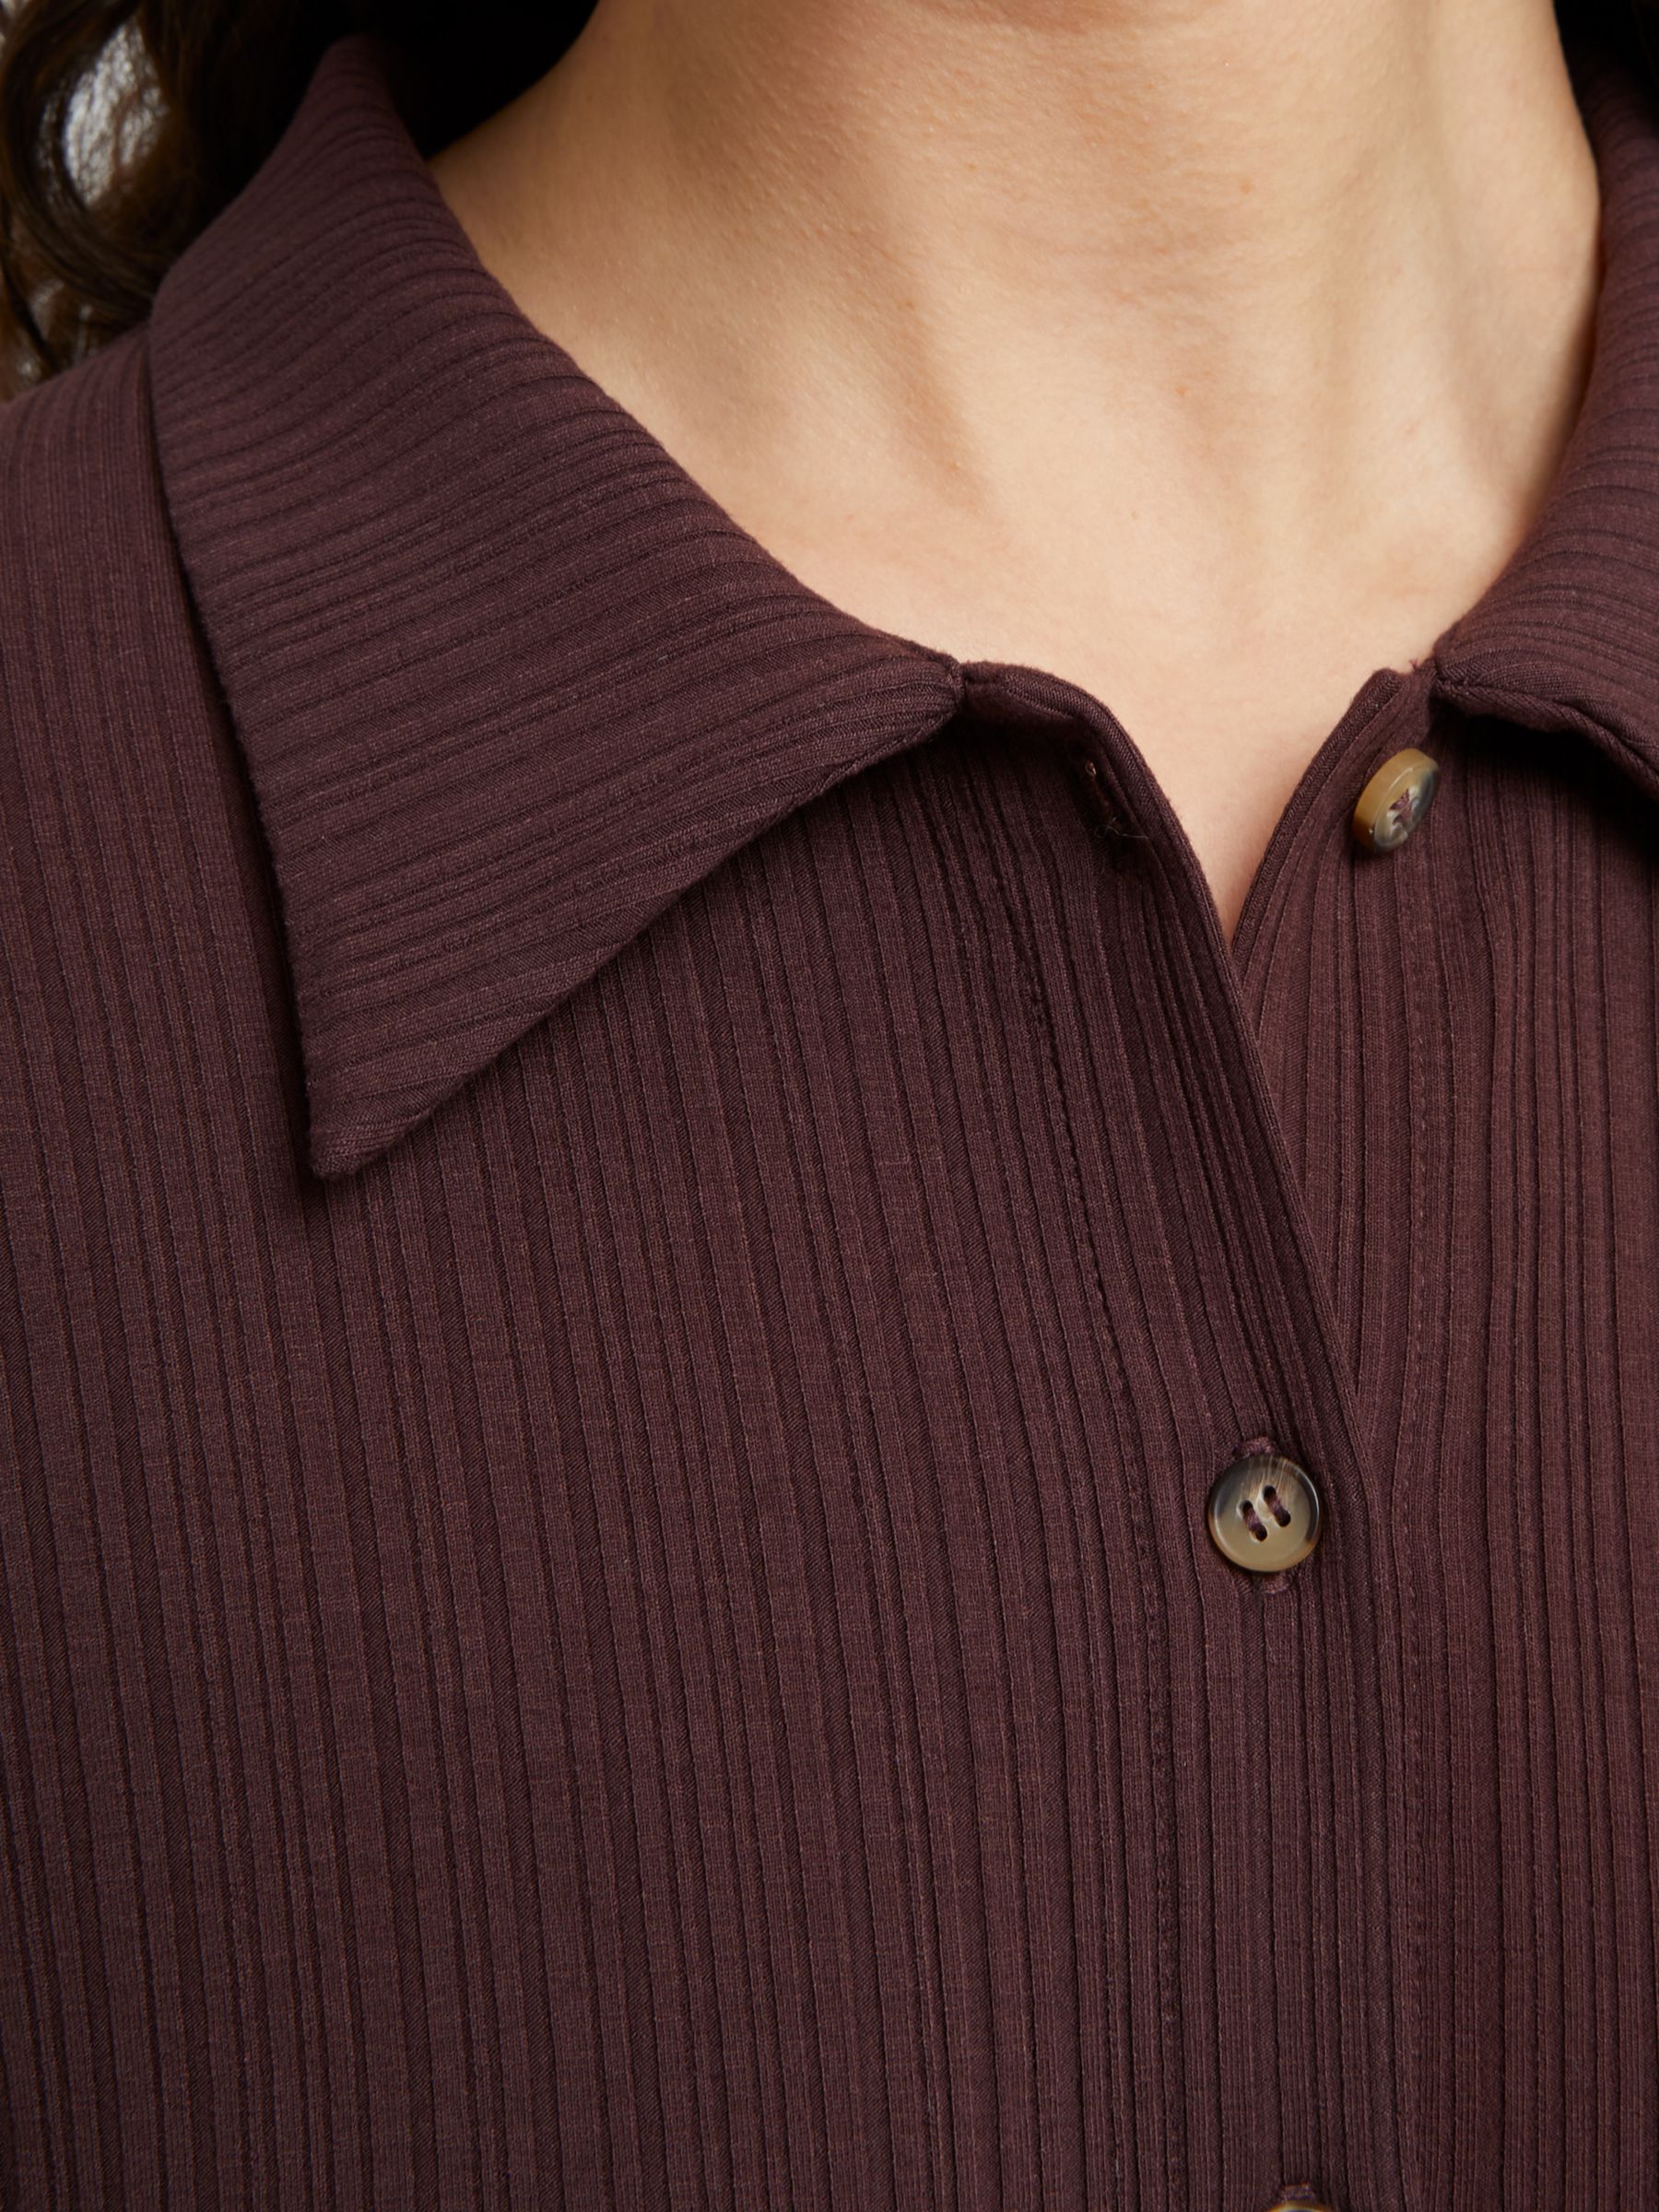 Buy Great Plains Modern Rib Jersey Shirt, Cocoa Online at johnlewis.com